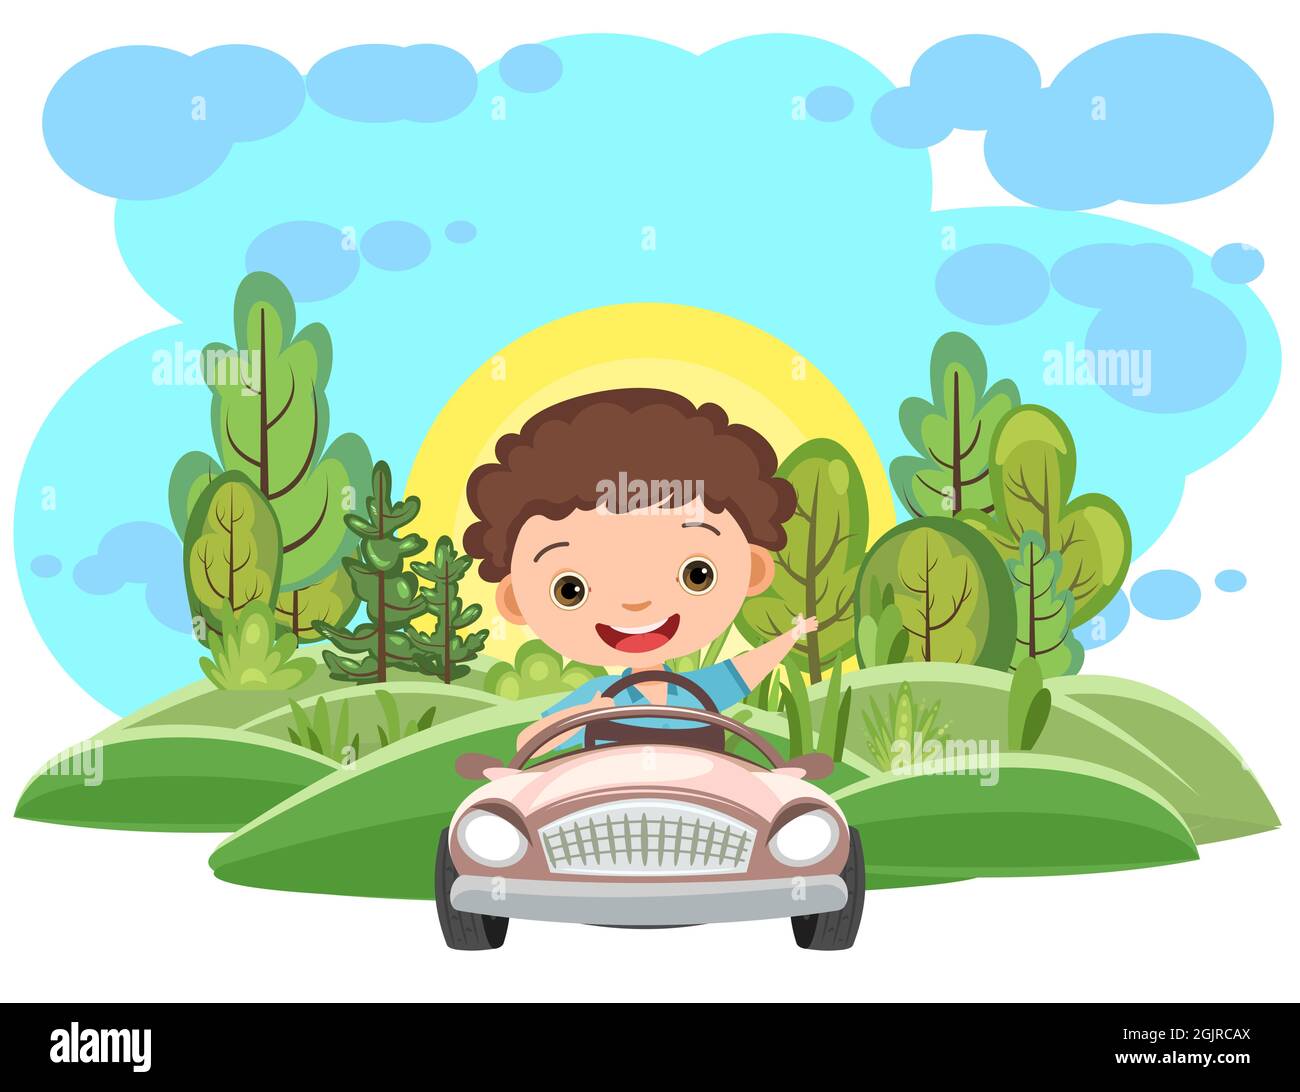 Childrens trip in a small car. Kid drives a pedal or electric toy automobile. Sun. Cartoon illustration. Isolated. Summer rural landscape. Vector Stock Vector